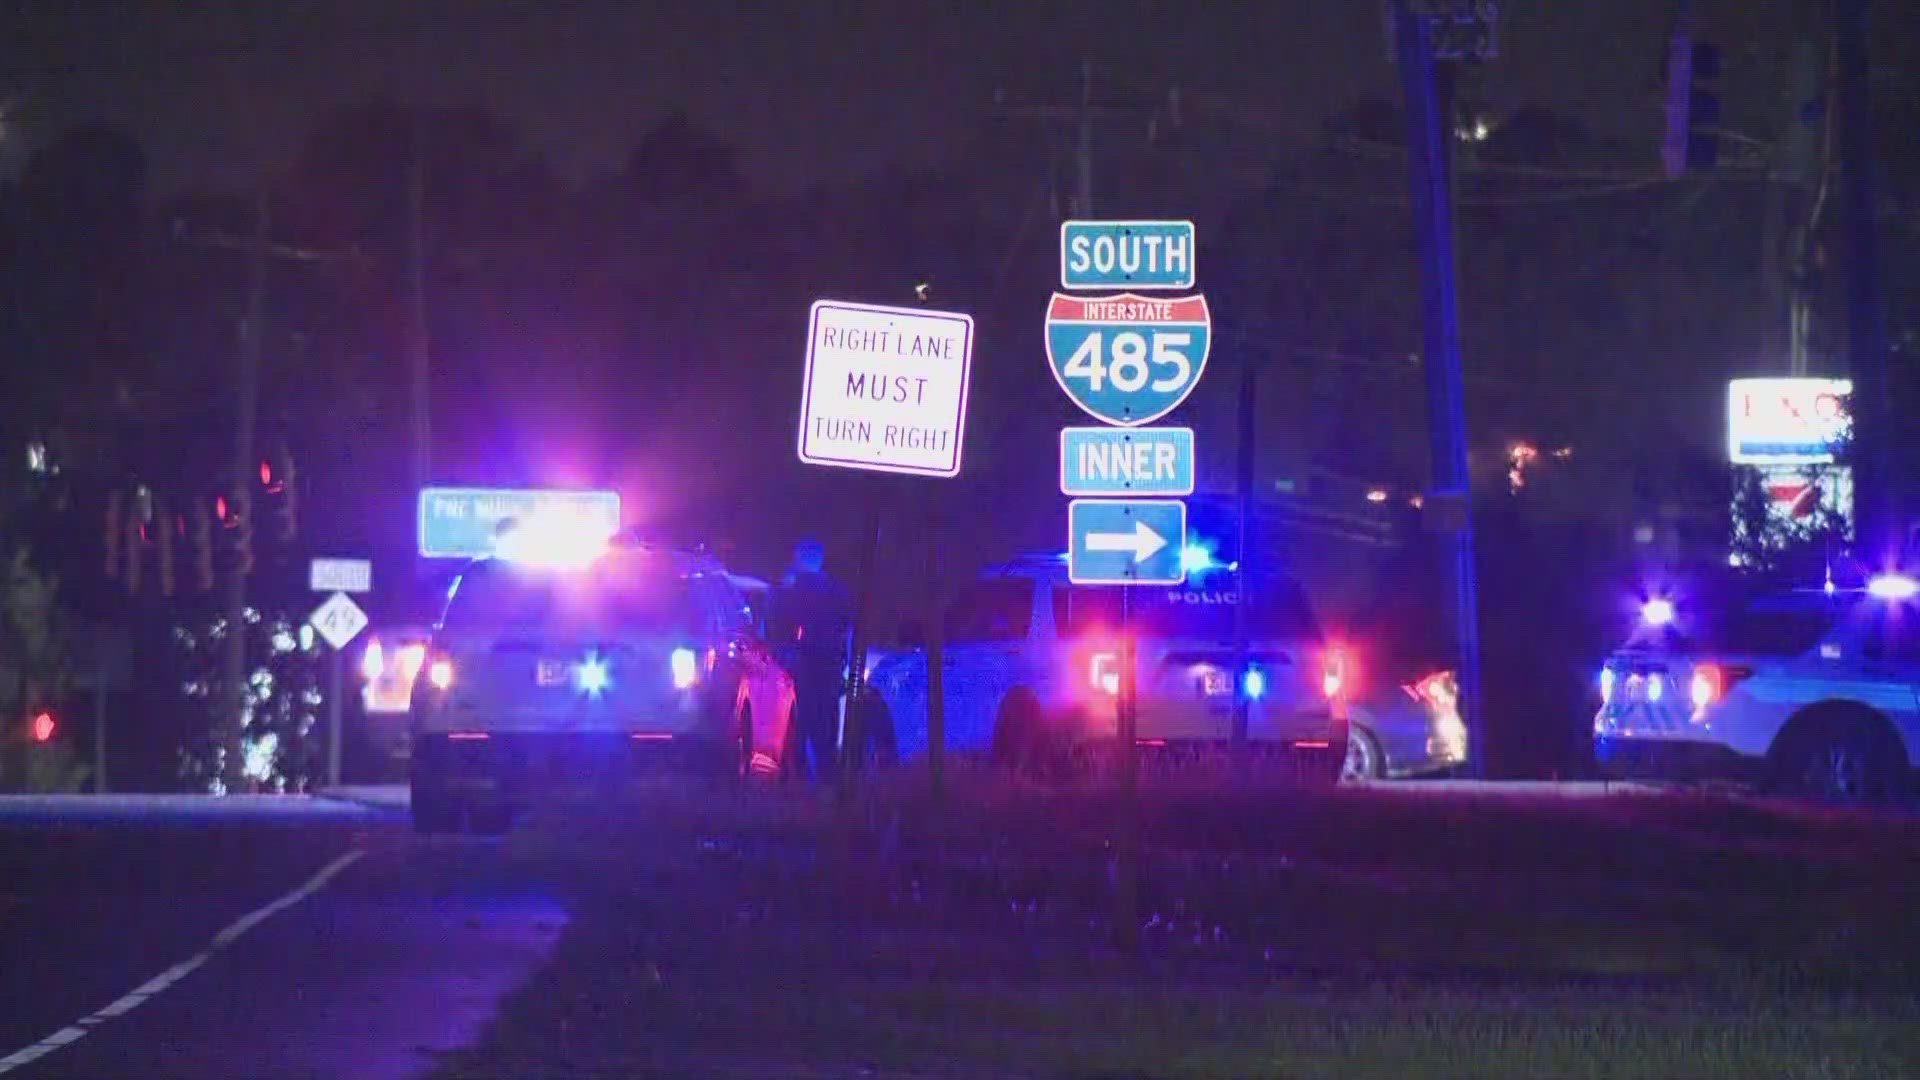 The inner loop of I-485 is back open after a pedestrian was killed near University City Boulevard early Tuesday morning.